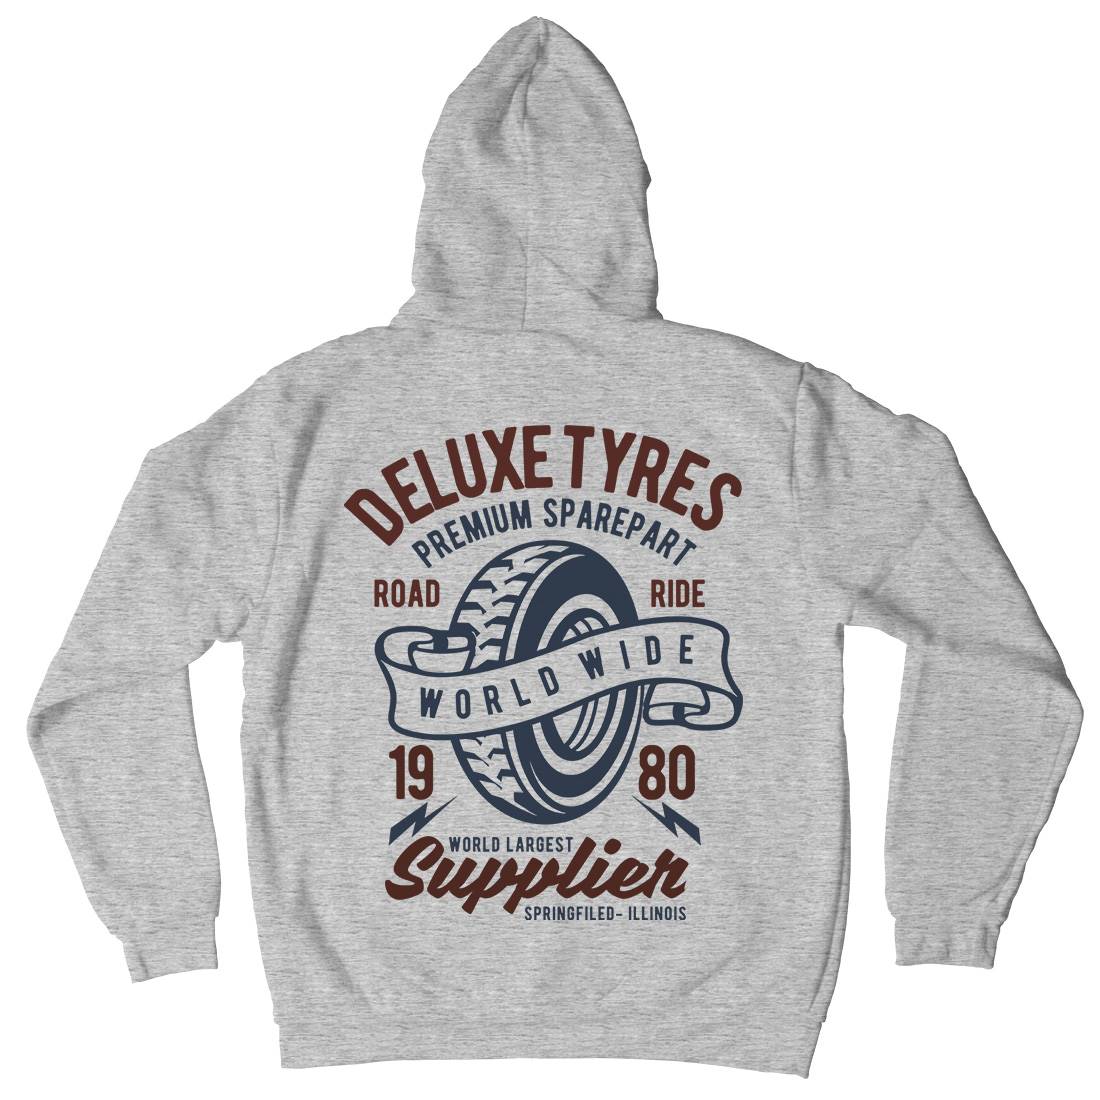 Deluxe Tyres Mens Hoodie With Pocket Cars B204